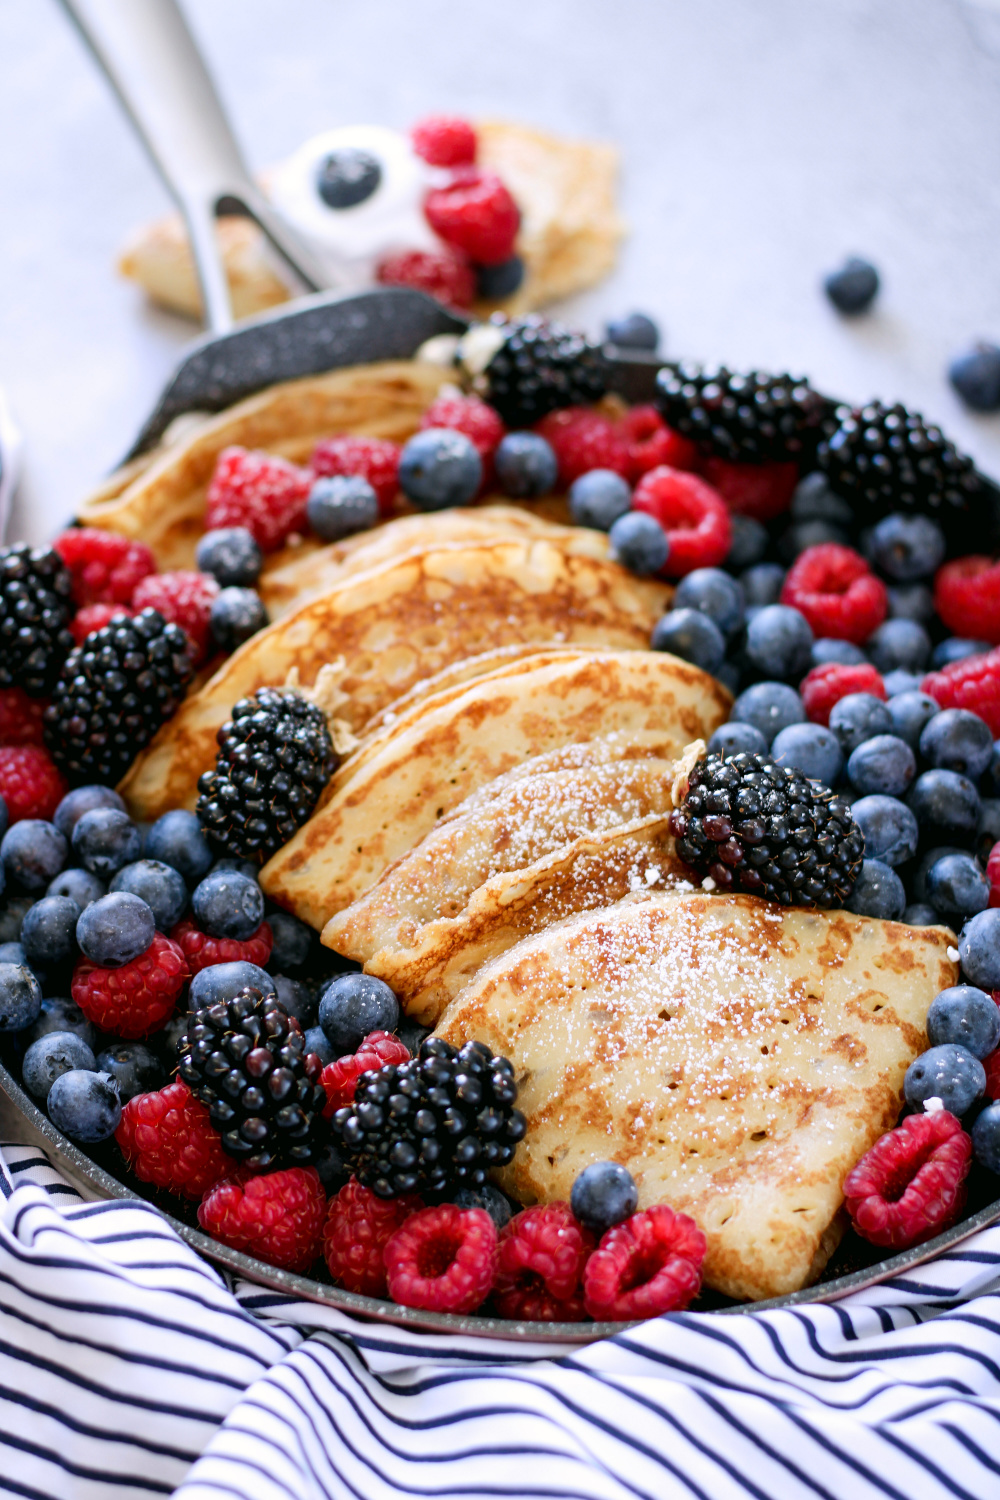 How to Make Easy Homemade Crepes